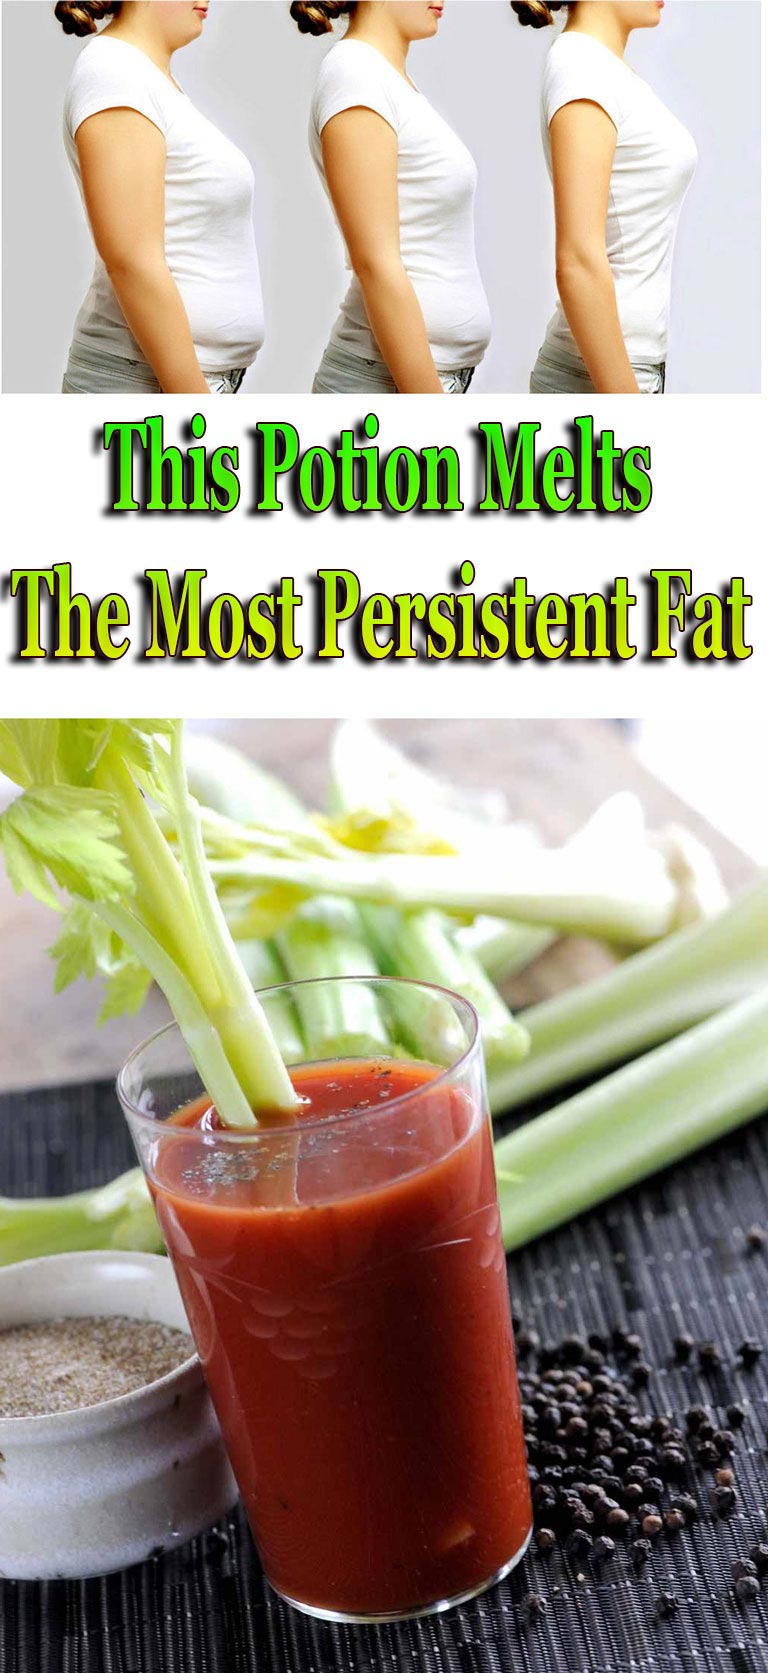 This Potion Melts The Most Persistent Fat